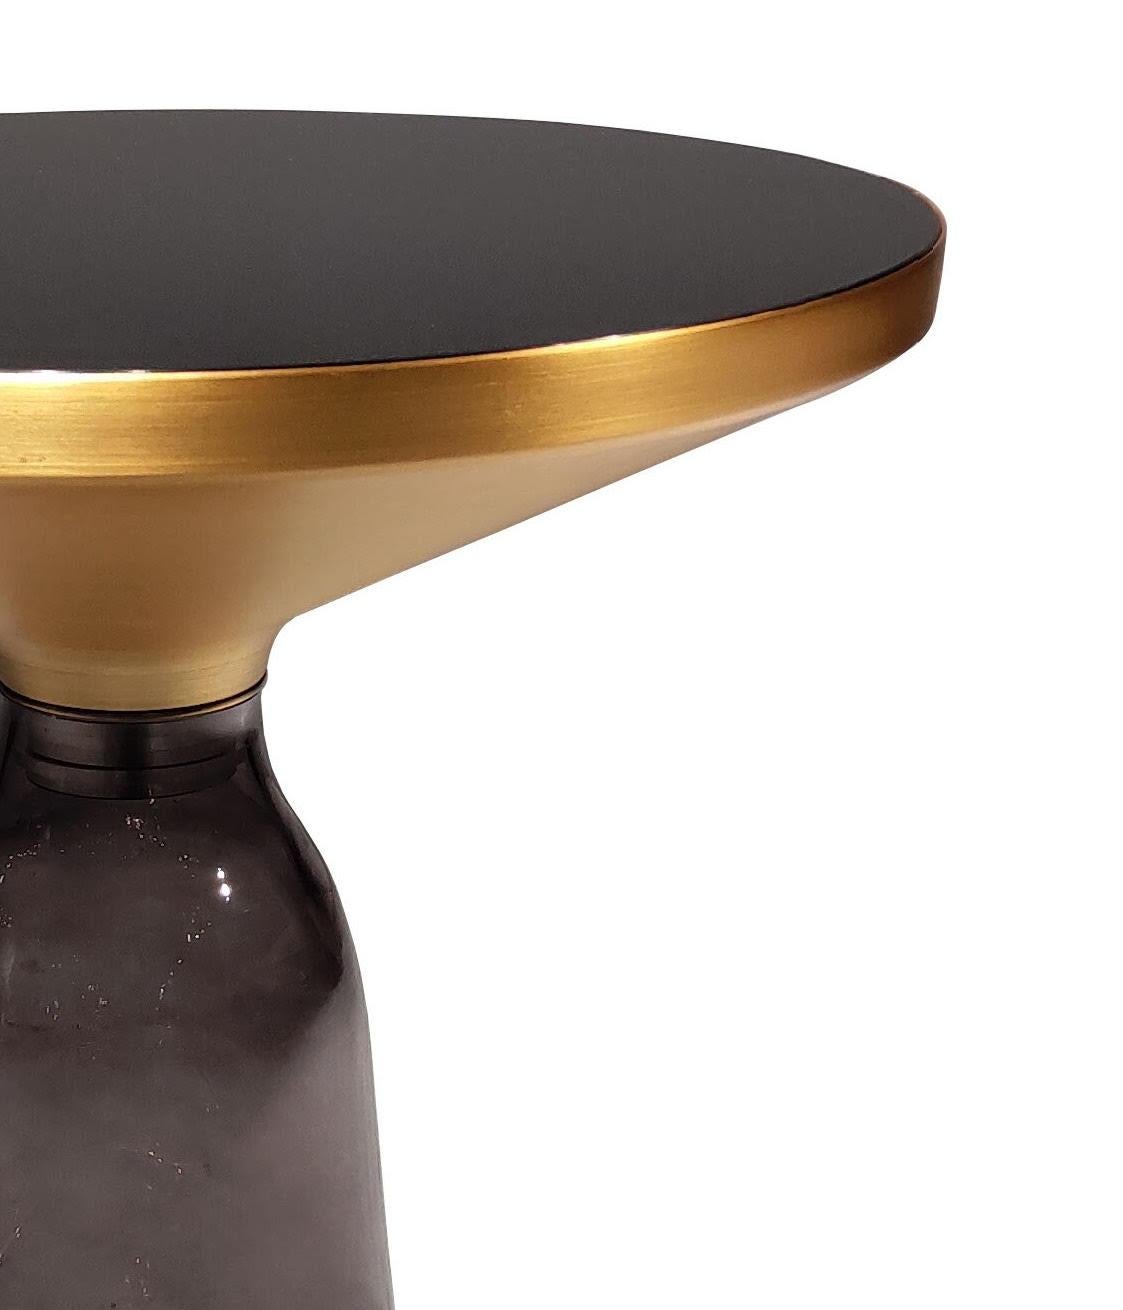 Bell Side Table in Glass
This modern 